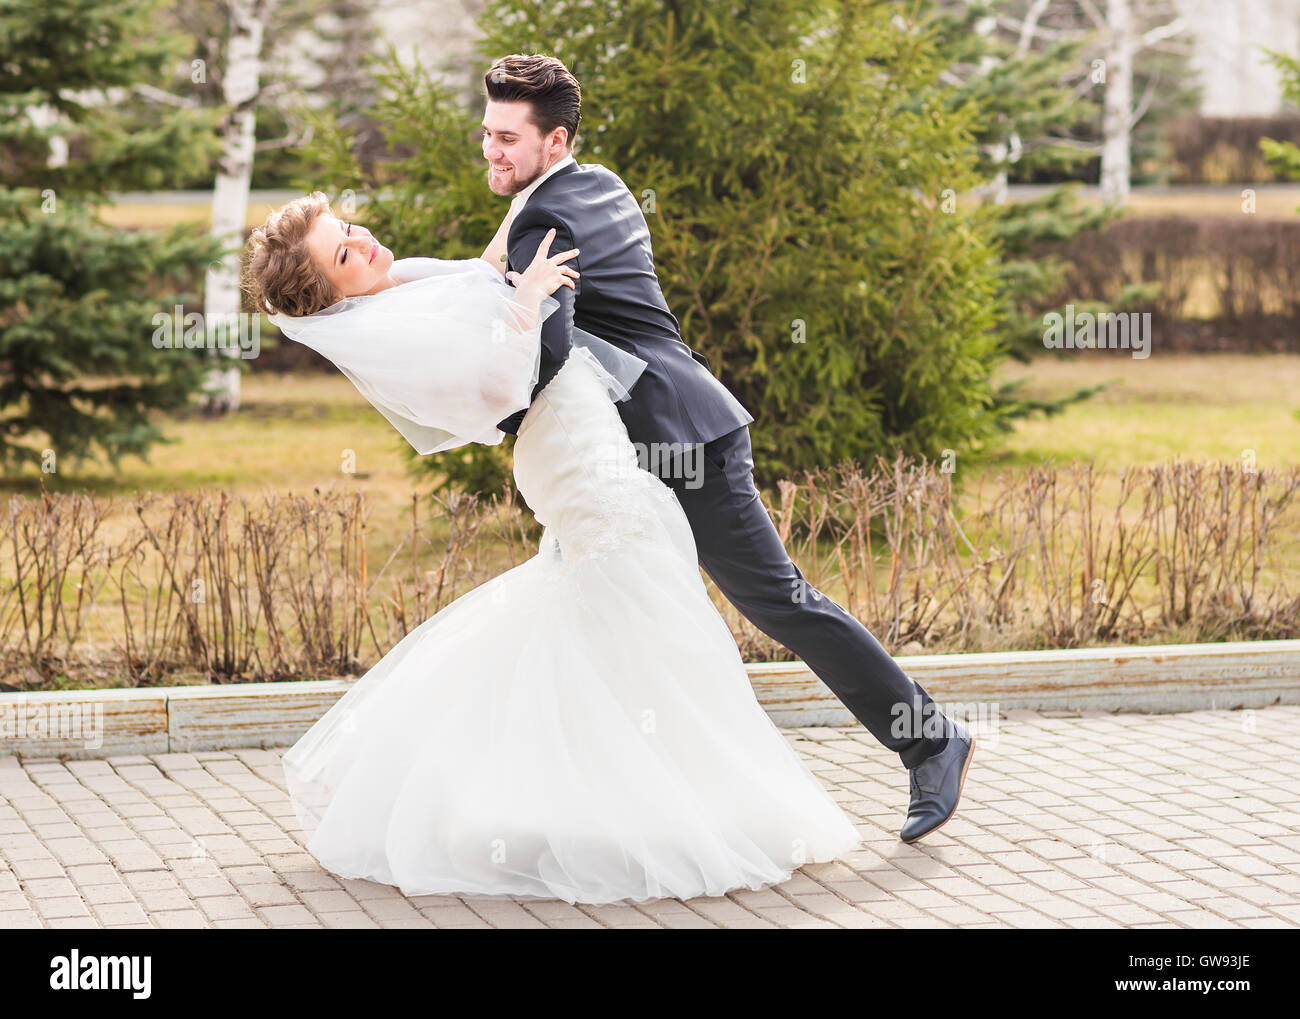 groom holding bride in dance pose on wedding day GW93JE